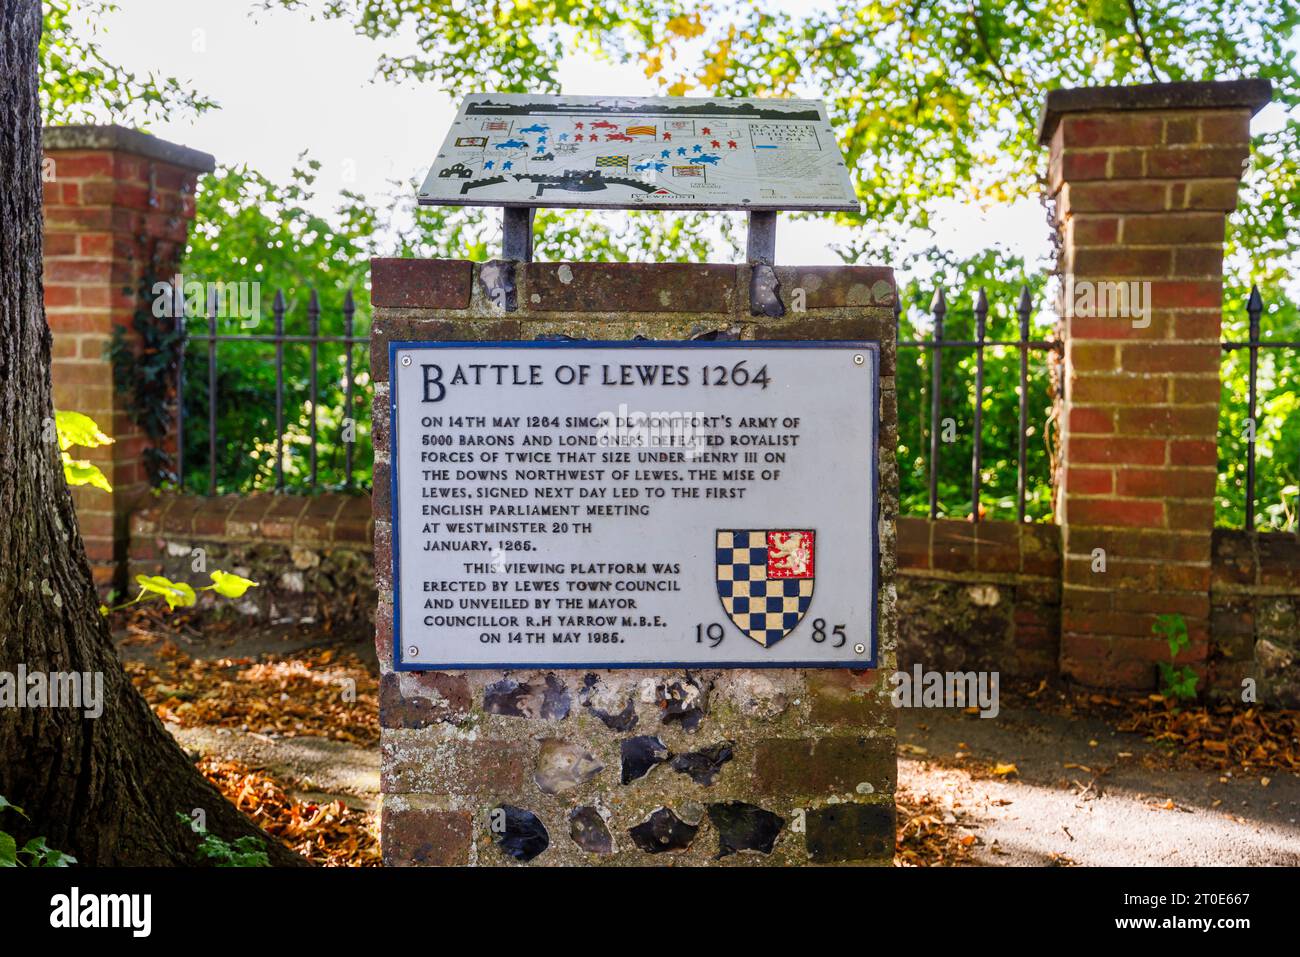 Plaque commemorating the site of the Battle of Lewes in 1264 on a viewing platform in Lewes, historic county town of East Sussex, south-east England Stock Photo